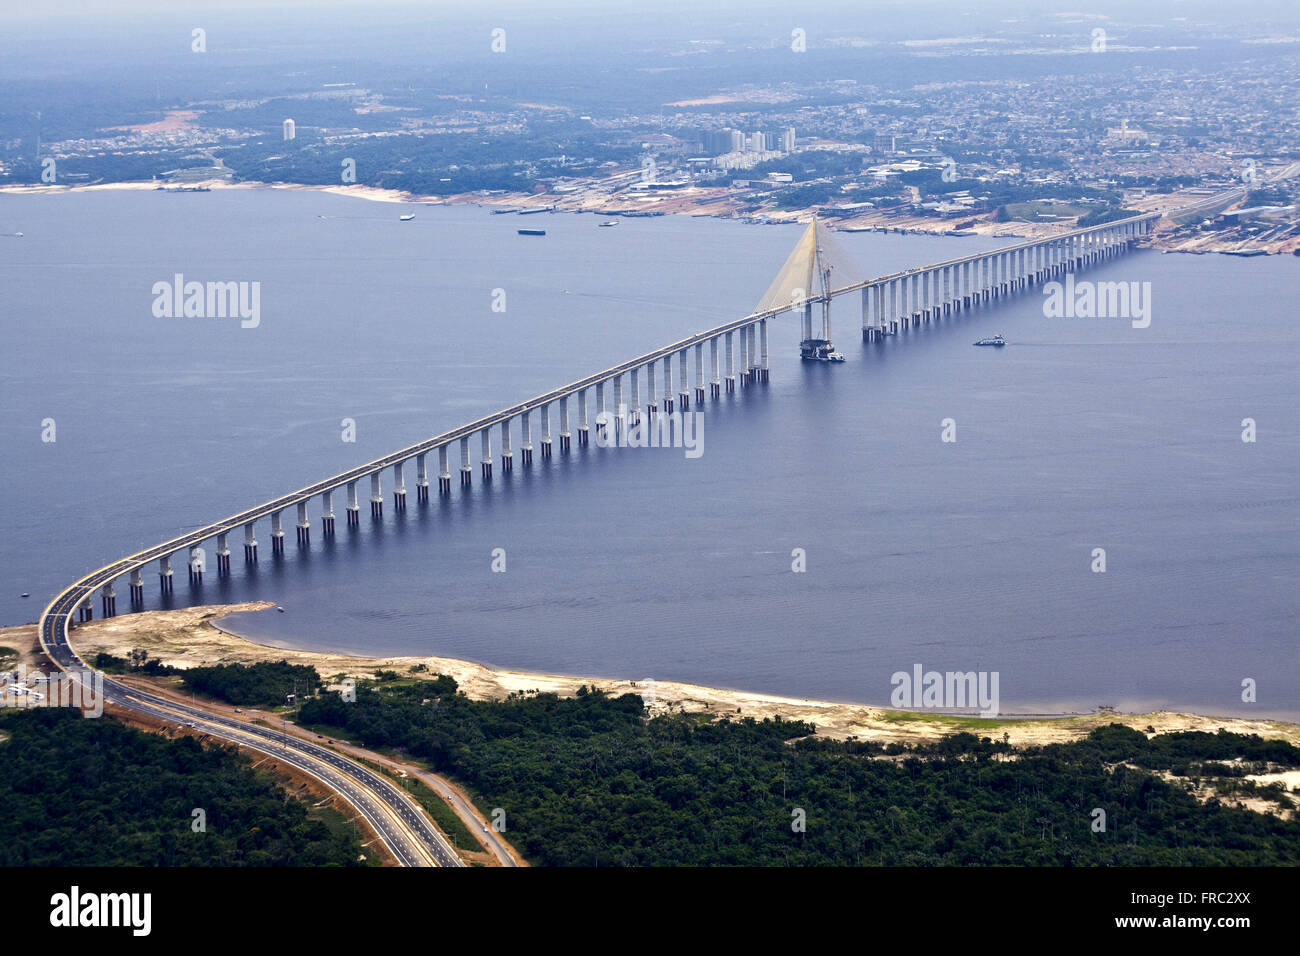 Aerial view of the bridge over the Black River which connects the city of Manaus Iranduba Stock Photo